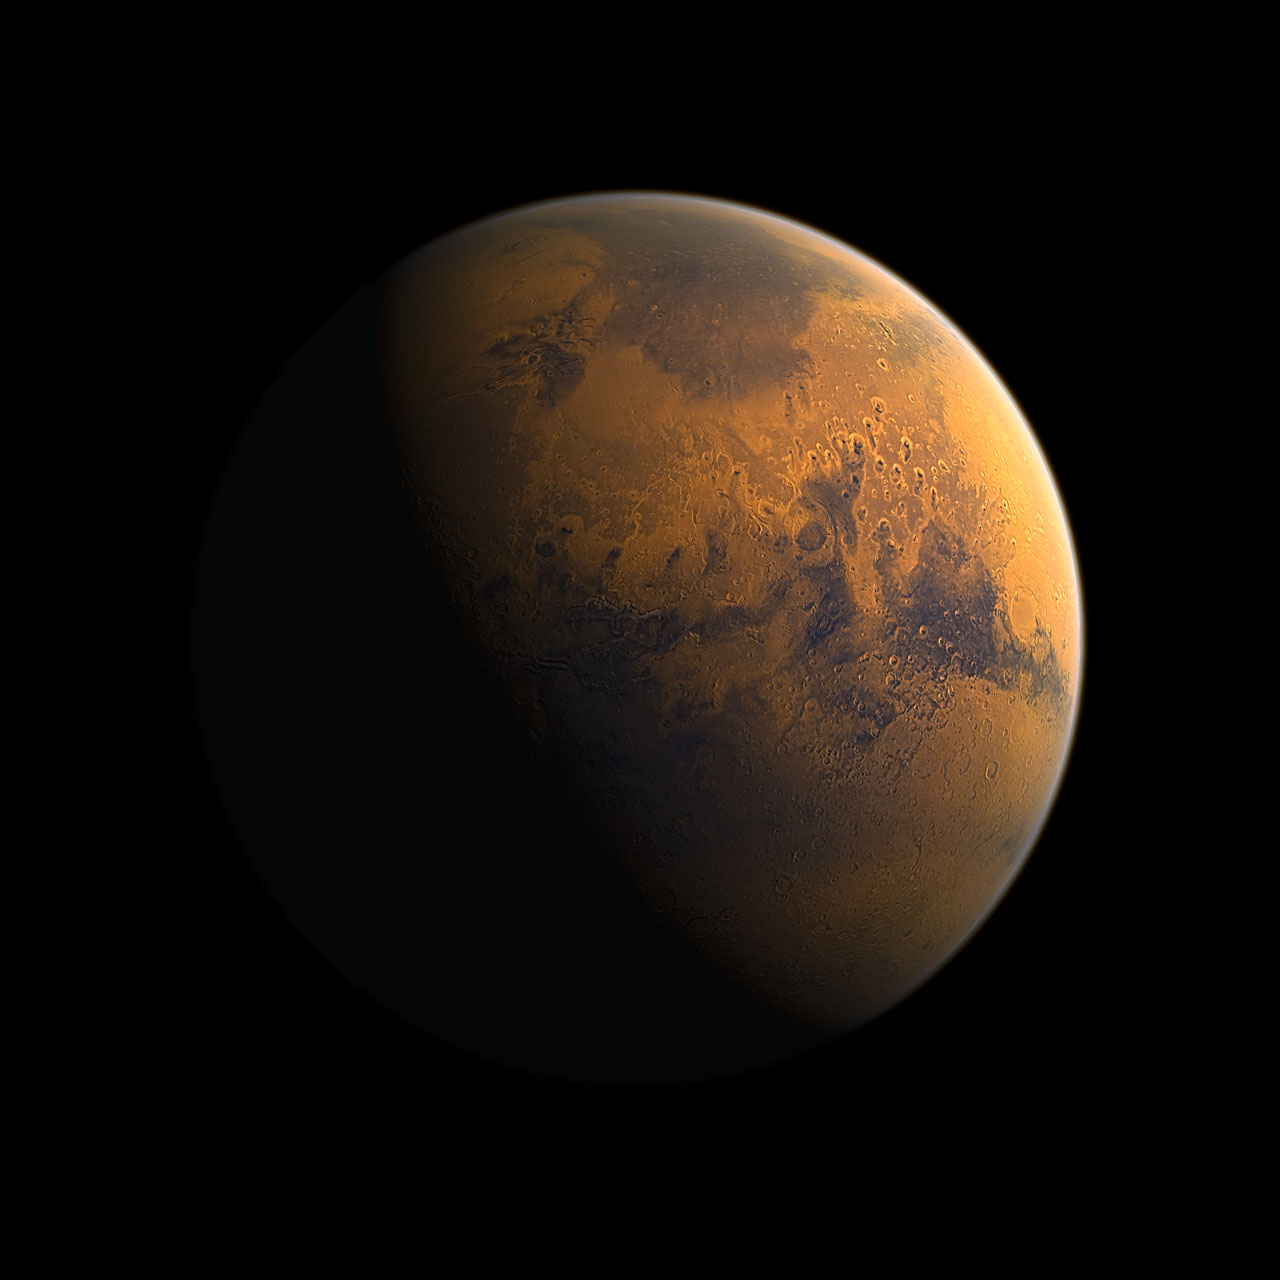 The cratered surface of the planet Mars (artist's impression)